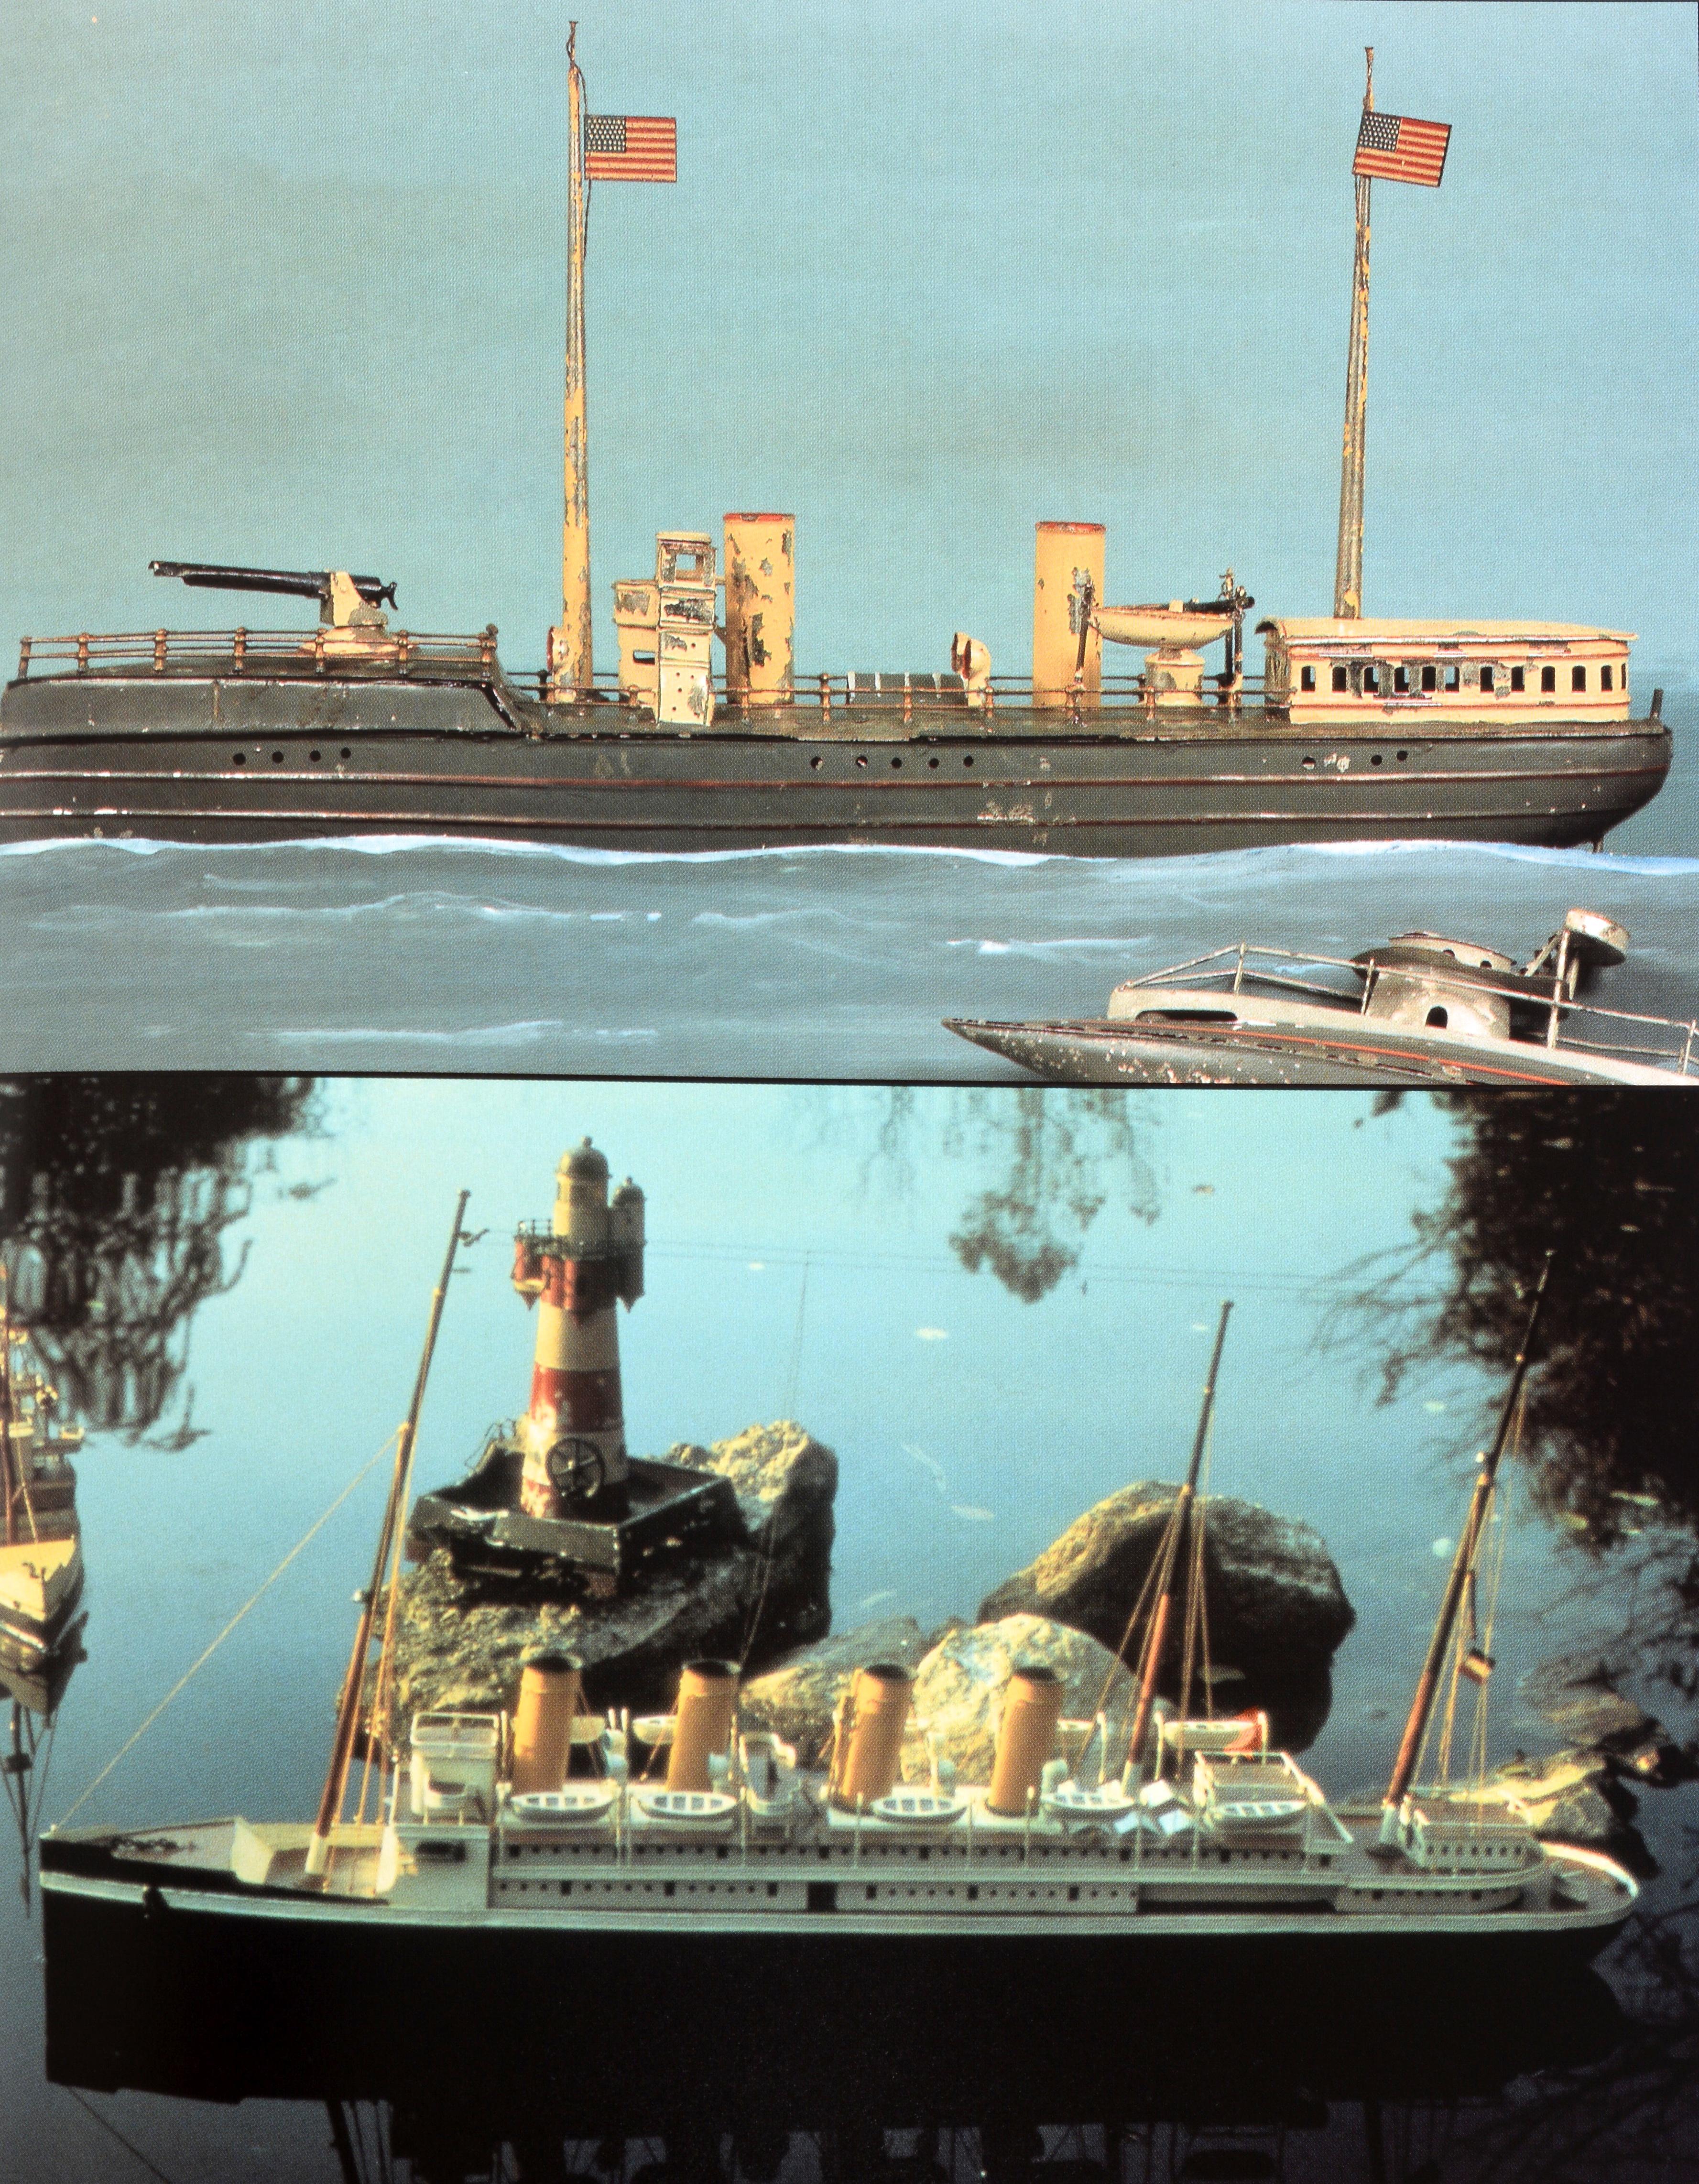 Contemporary Forbes Collection: Toy Boats-A Century of Treasures from Sailboats to Submarines